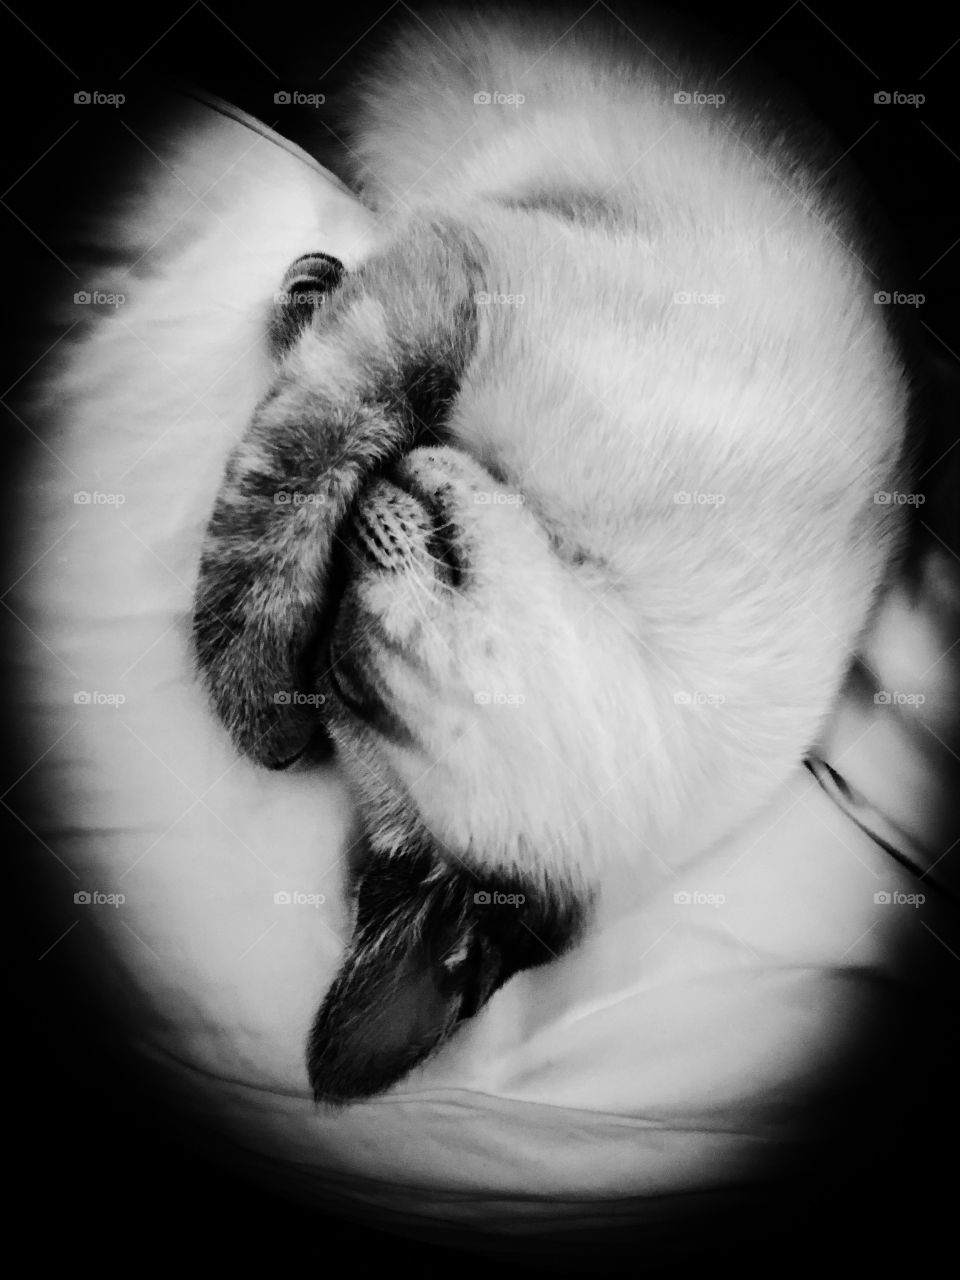 Curled up sleeping kitten in black and white